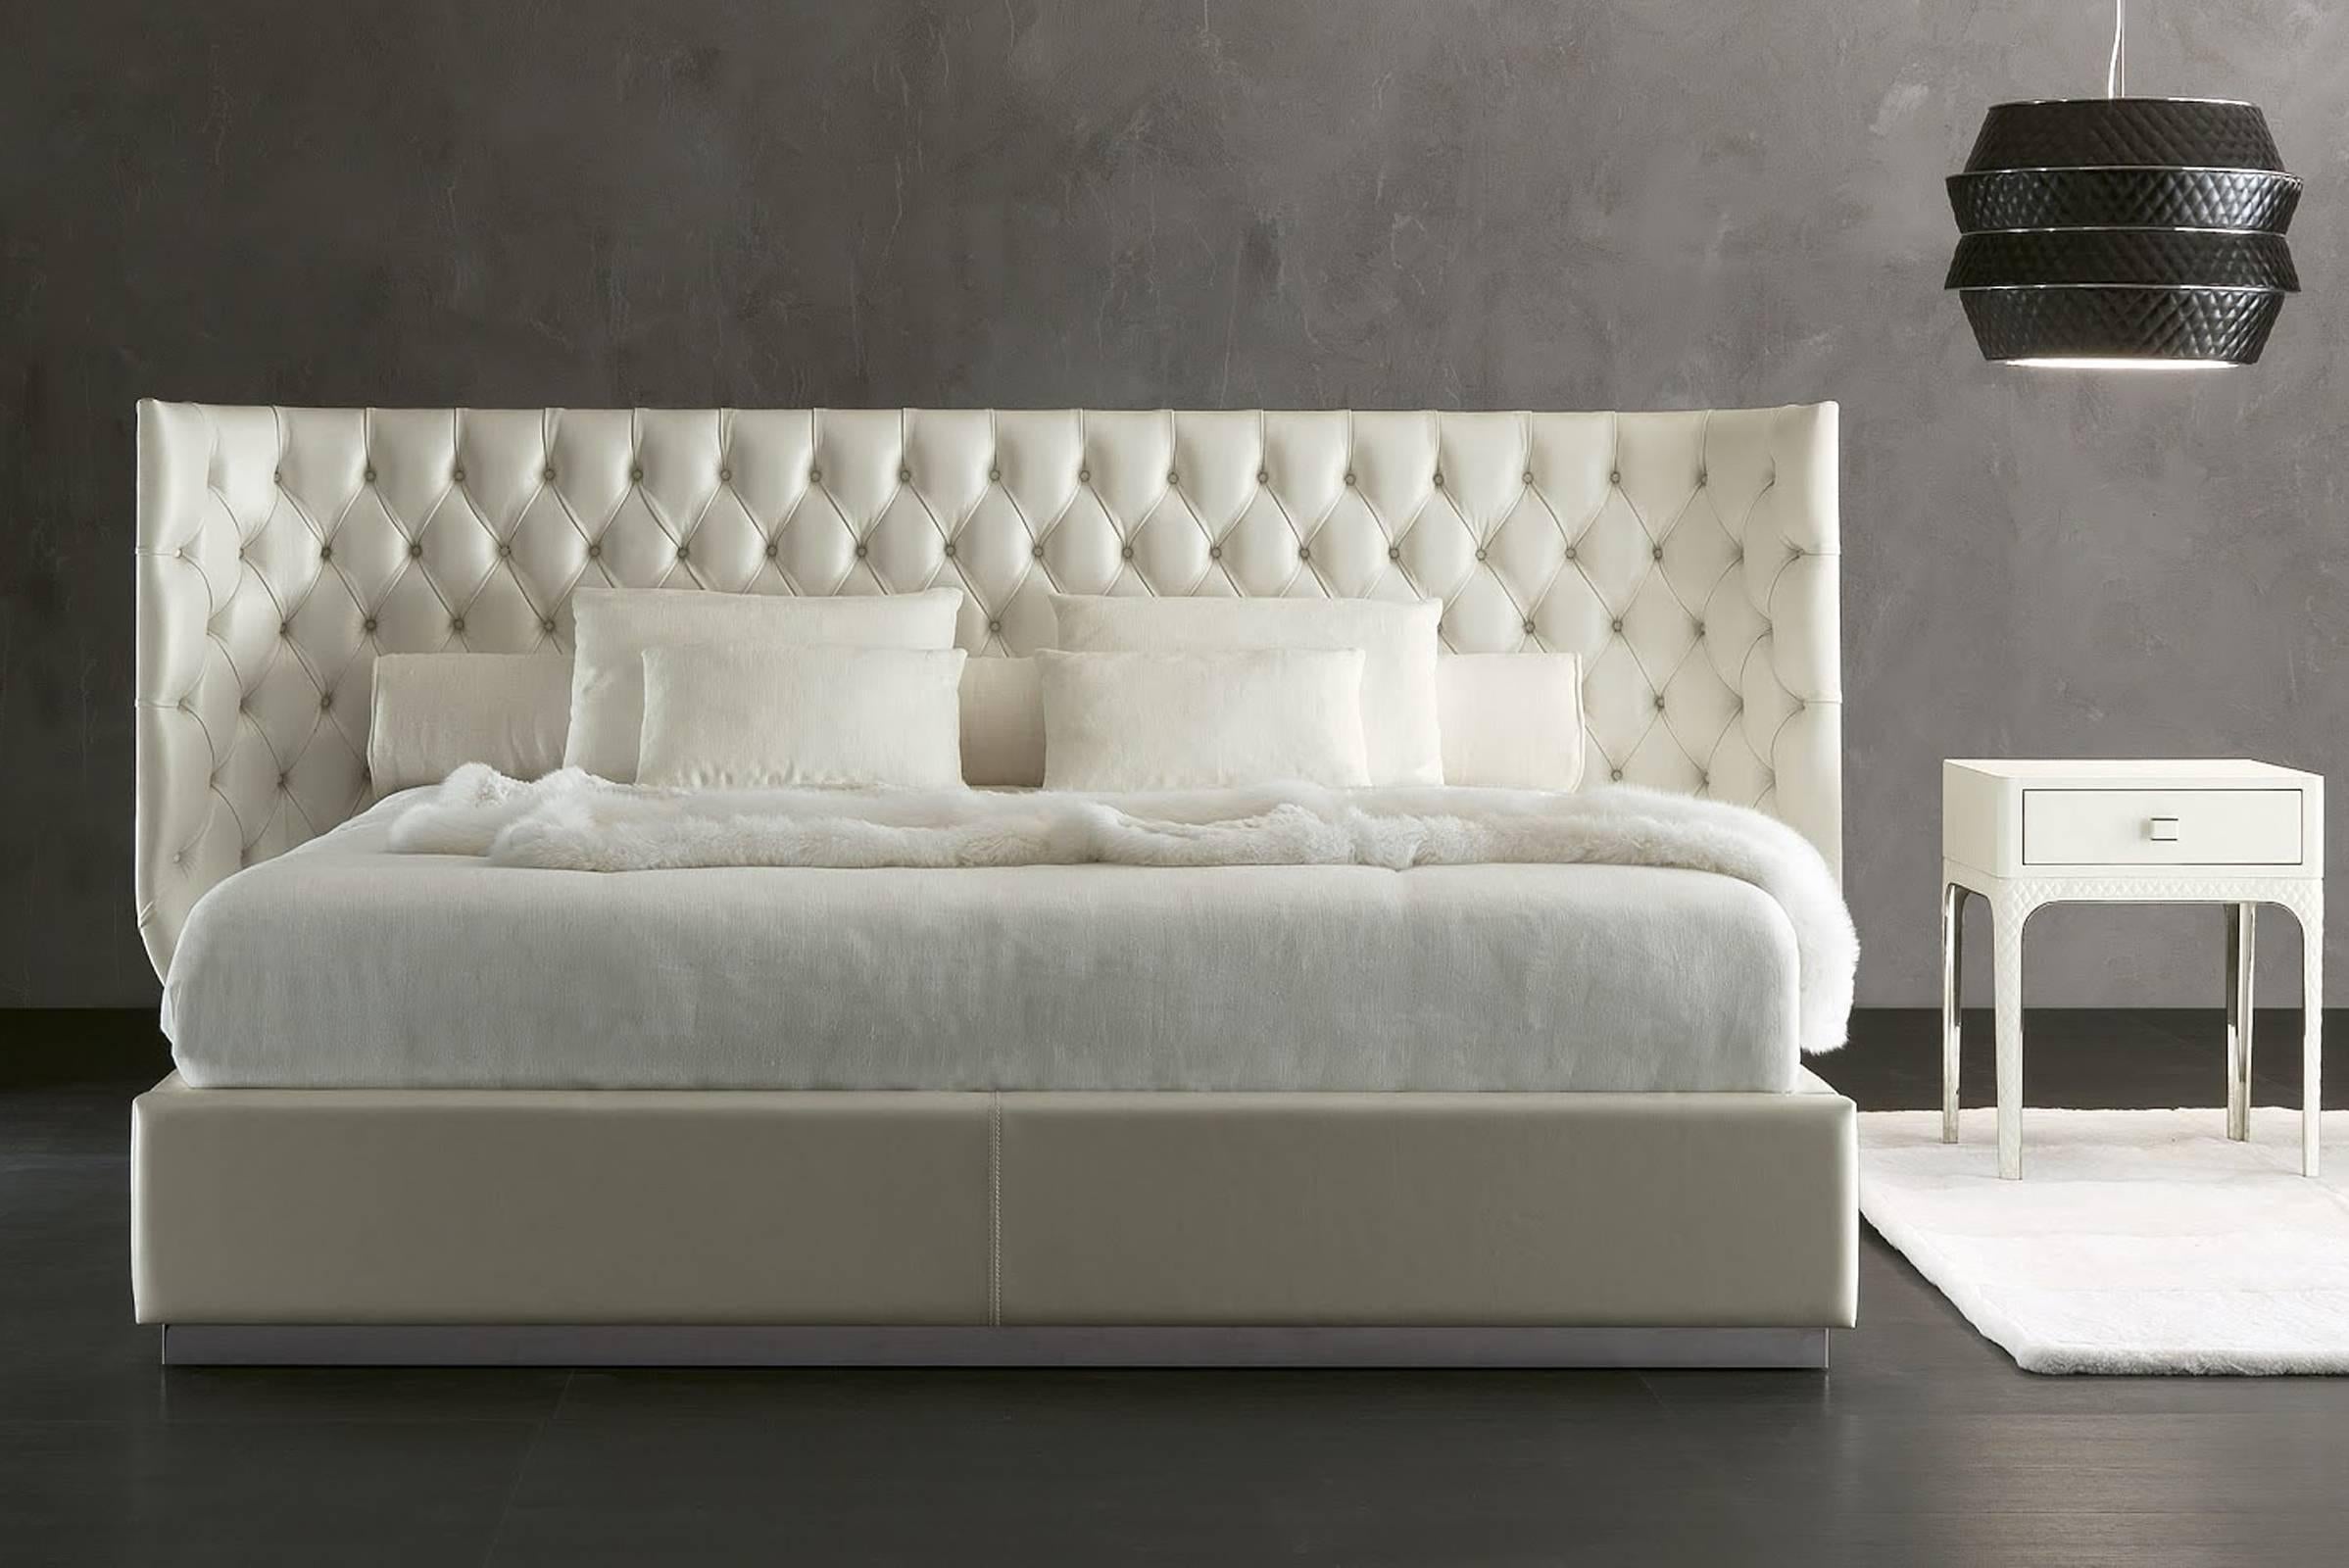 Italian Agra Bed in Fabric and Headboard with Fabric Matelasse